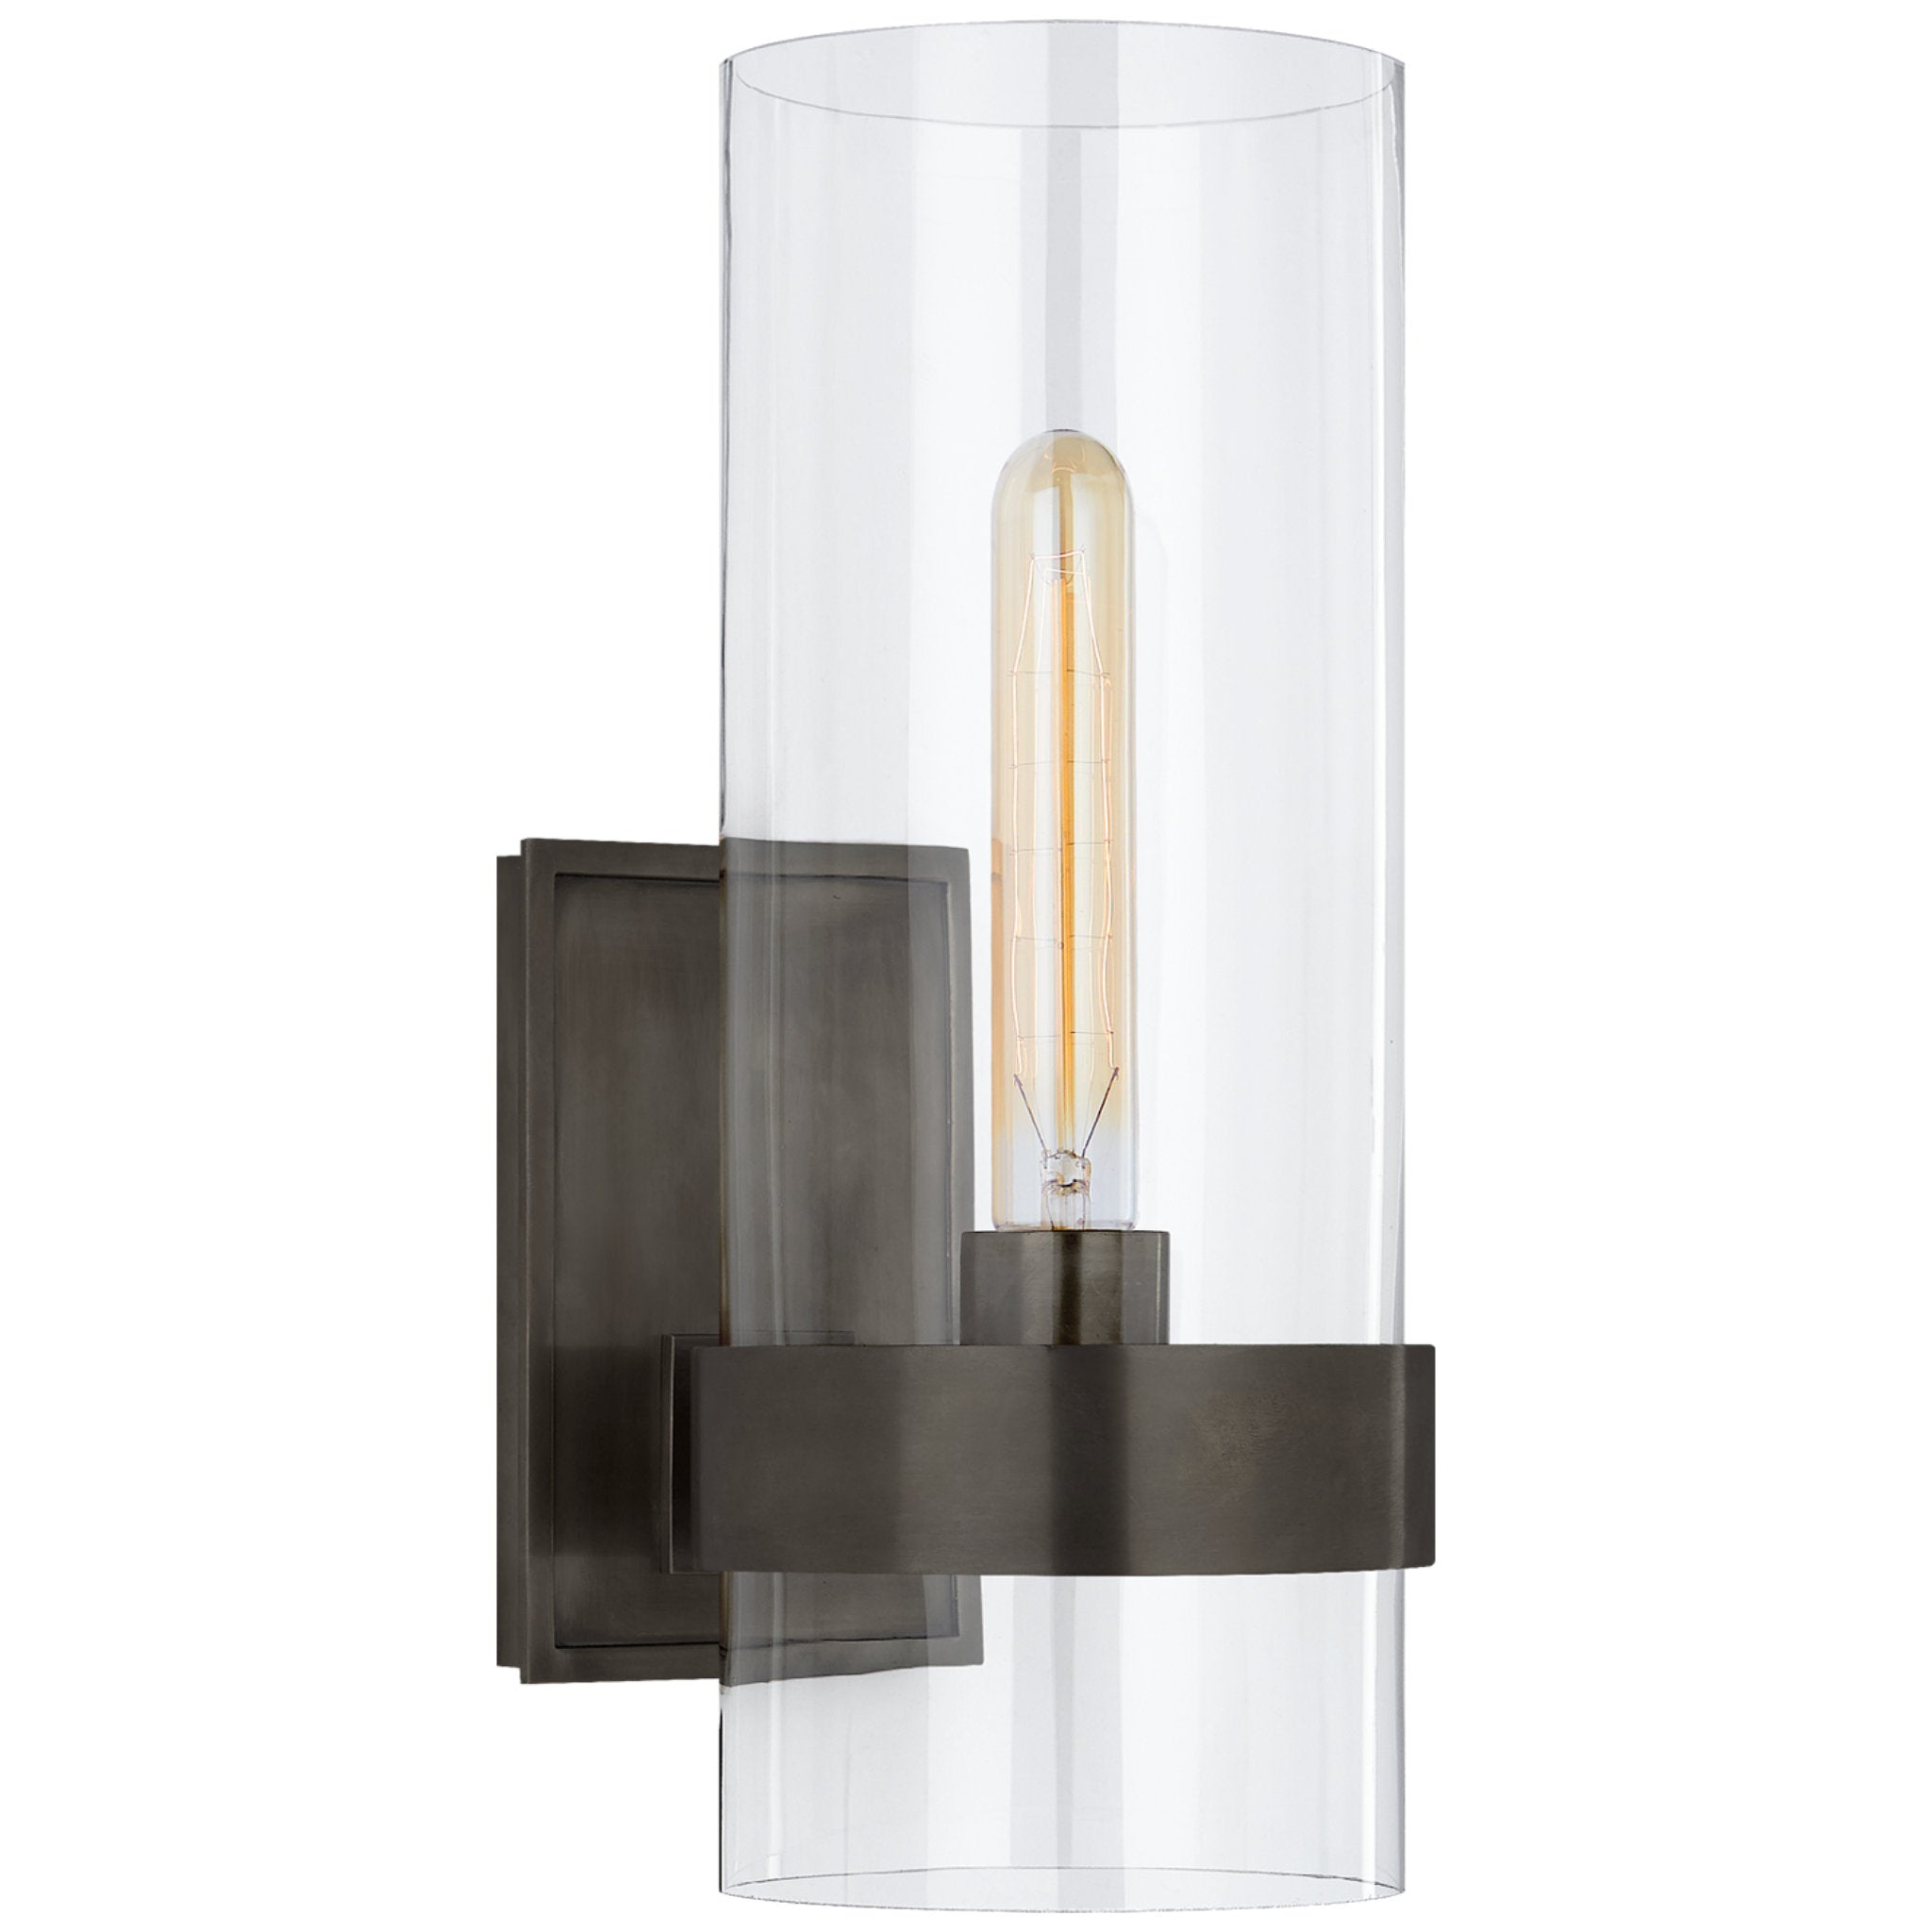 Ian K. Fowler Presidio Small Sconce in Bronze with Clear Glass